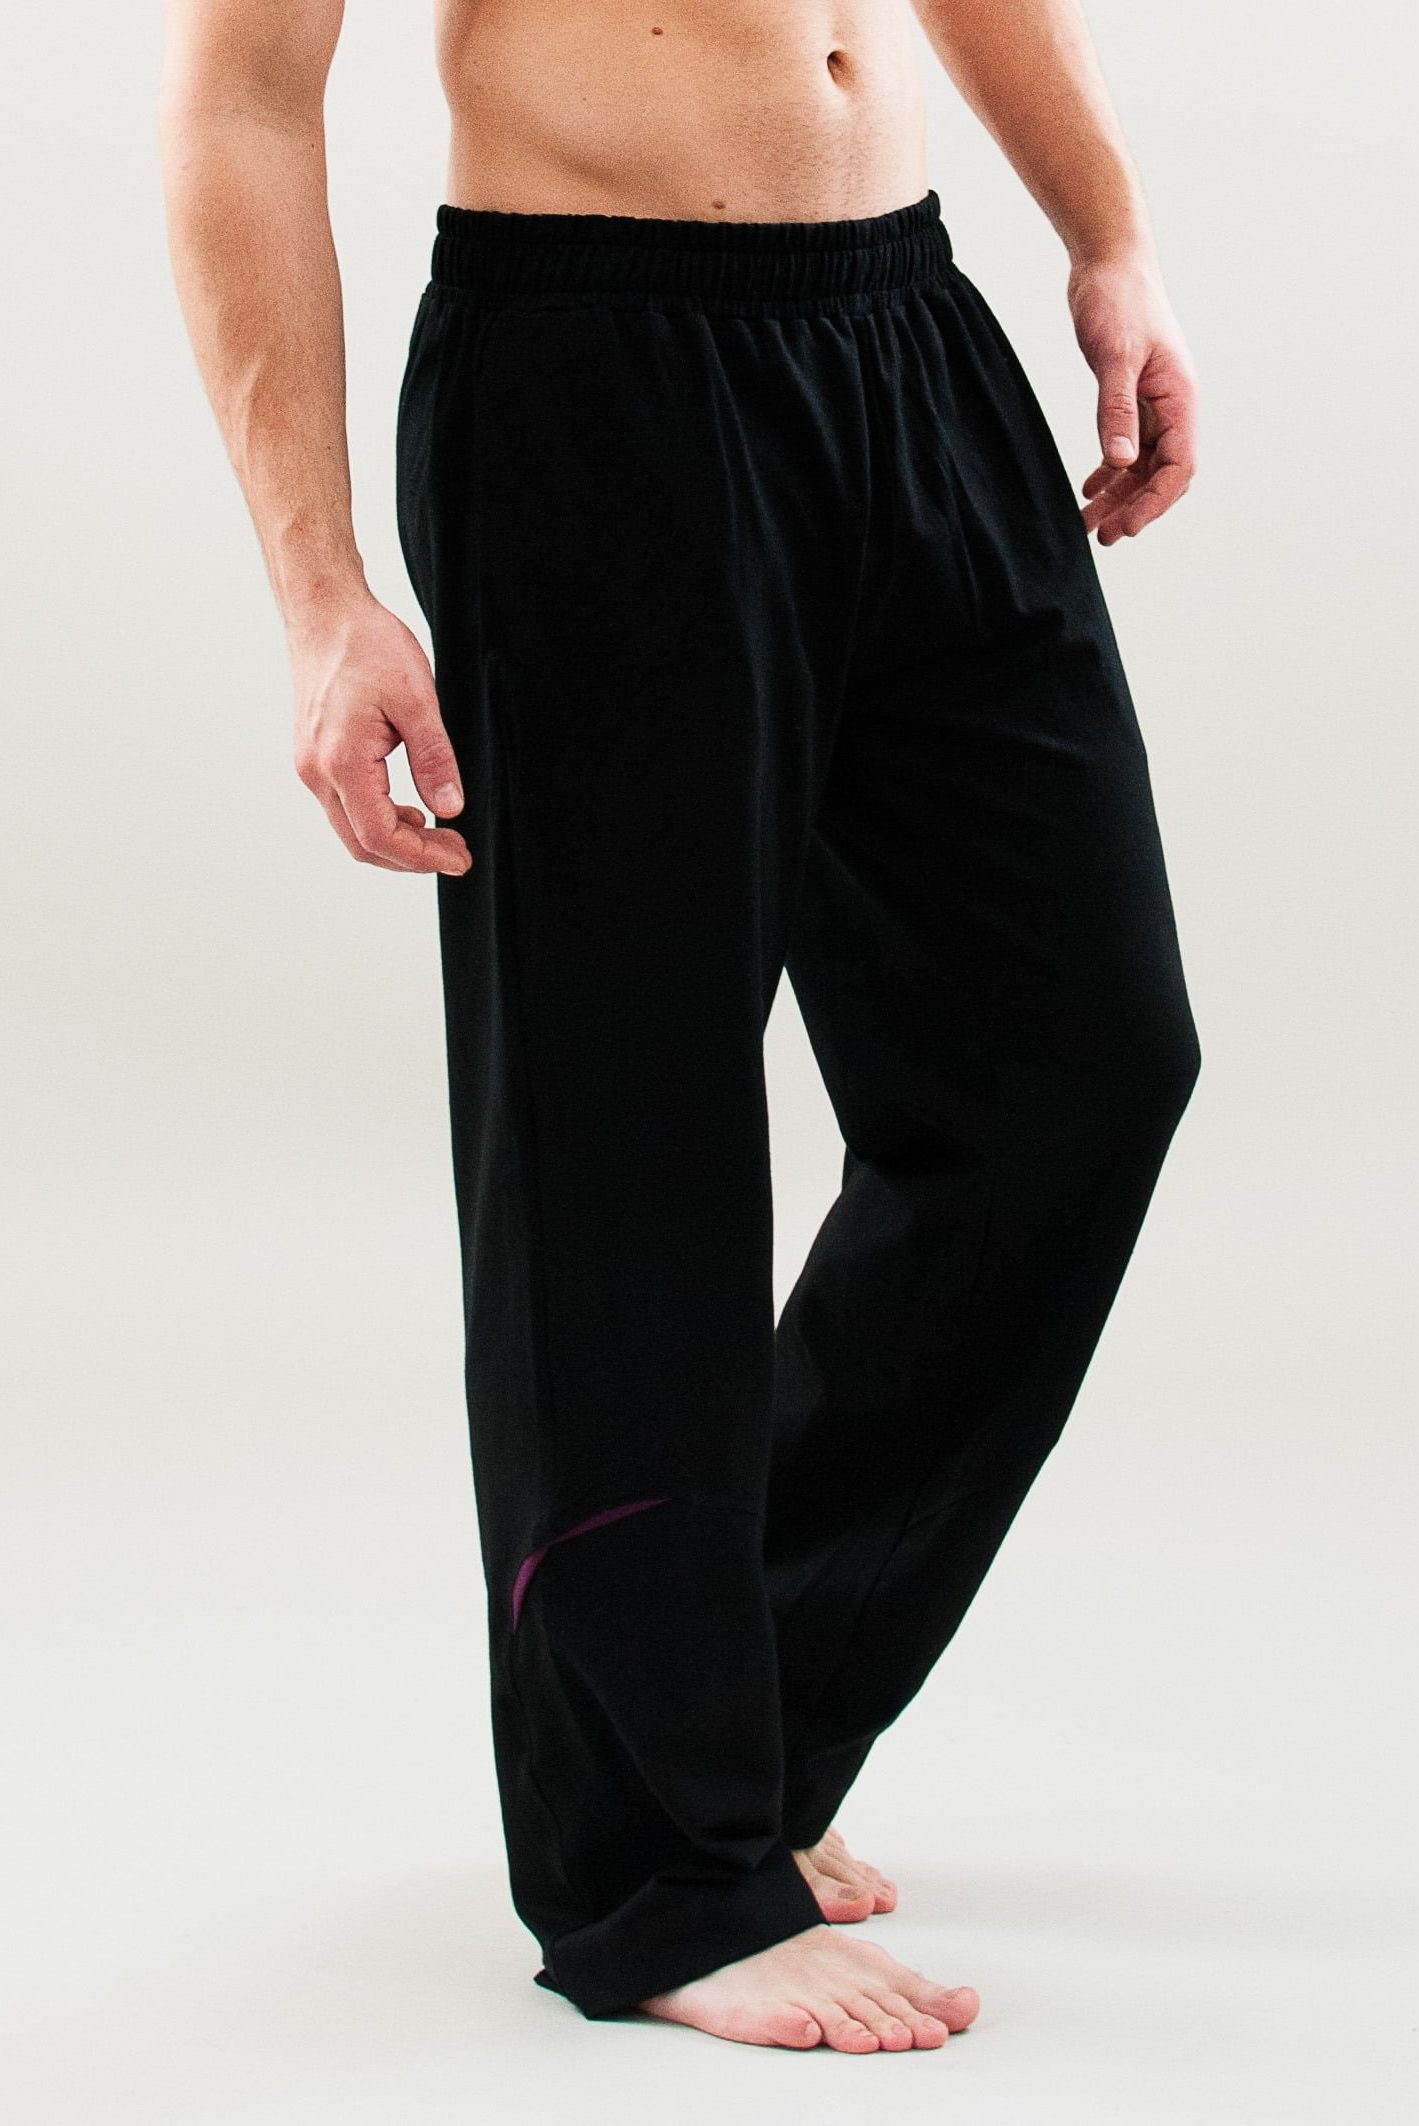 Black yoga pants for men, front view of a model raising a leg to show the wide fit and ease of movement on the knee.